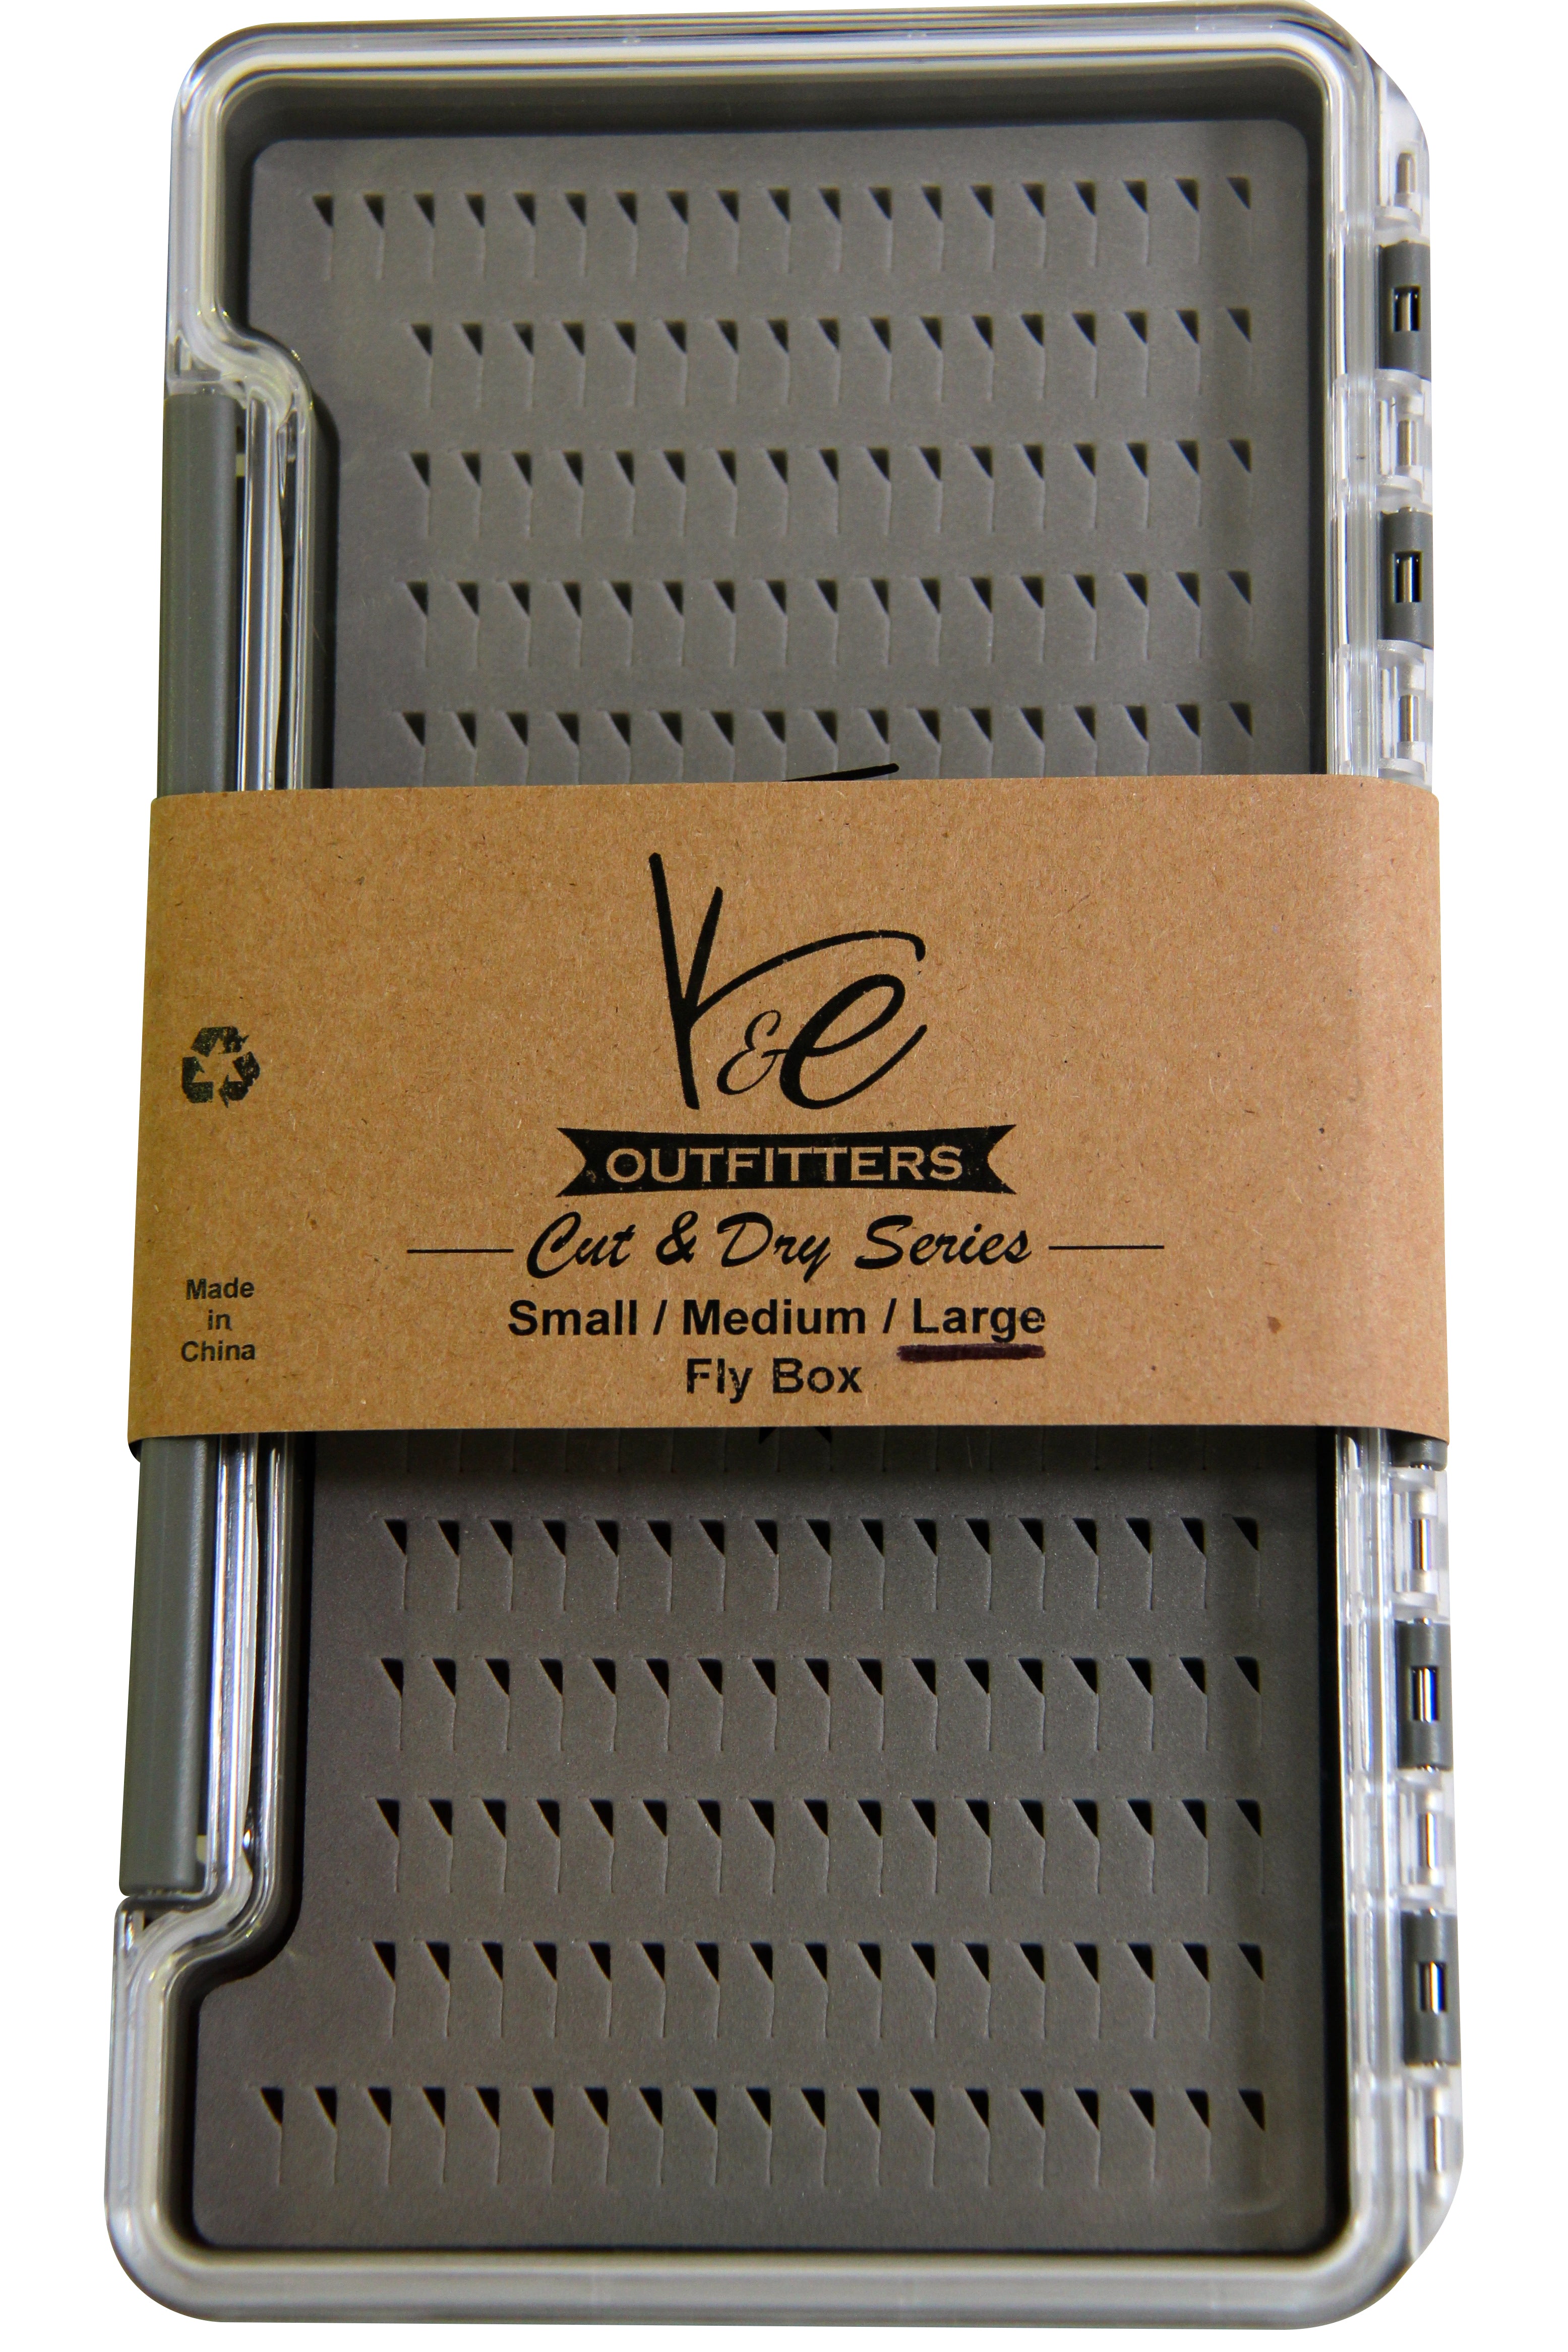 Cut and Dry Slim Fly Box - K&E Outfitters